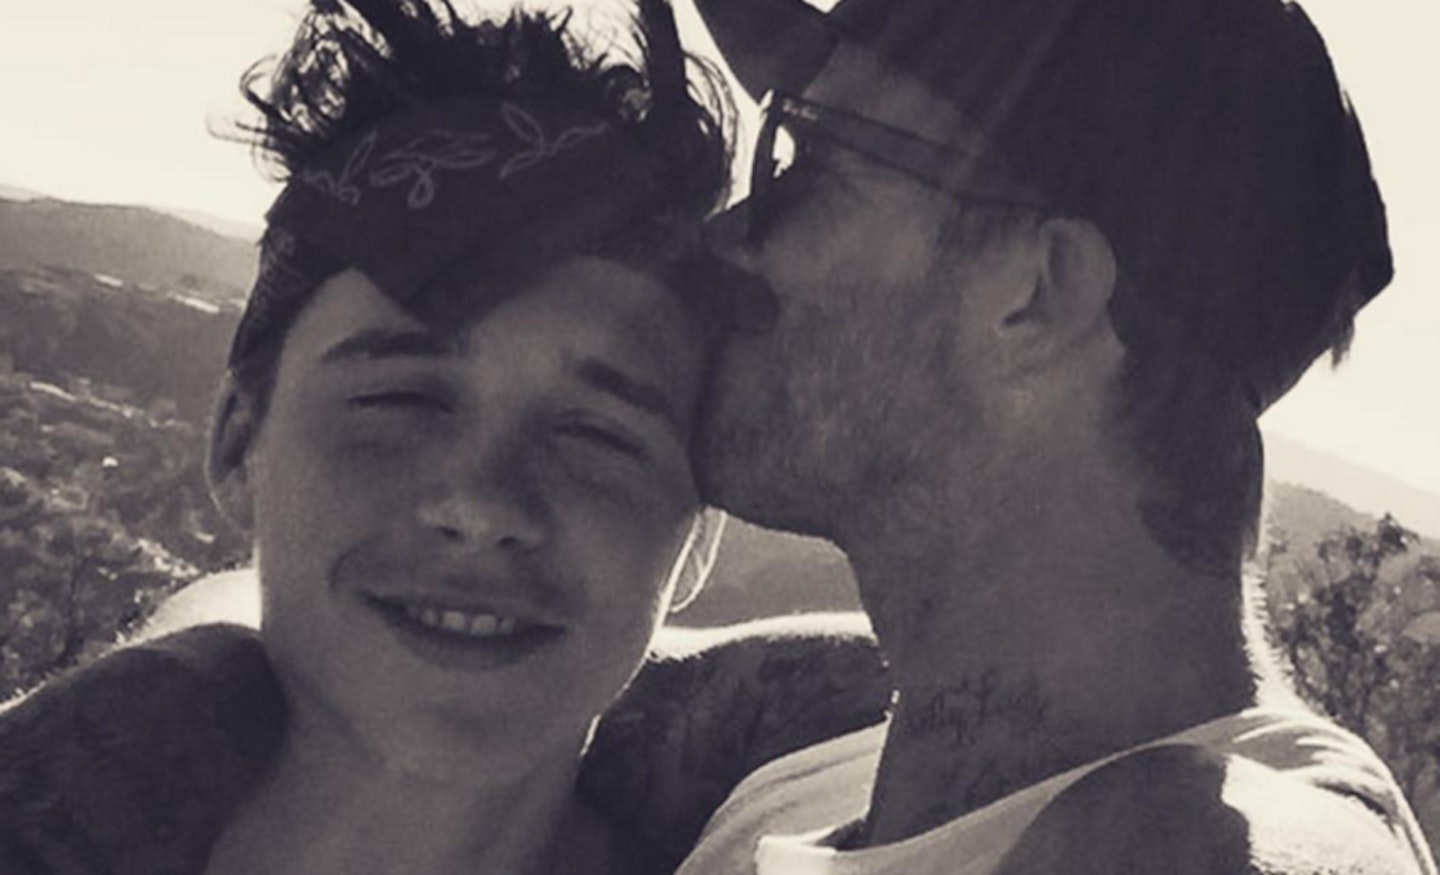 David and Brooklyn Beckham, Los Angeles, August 2015